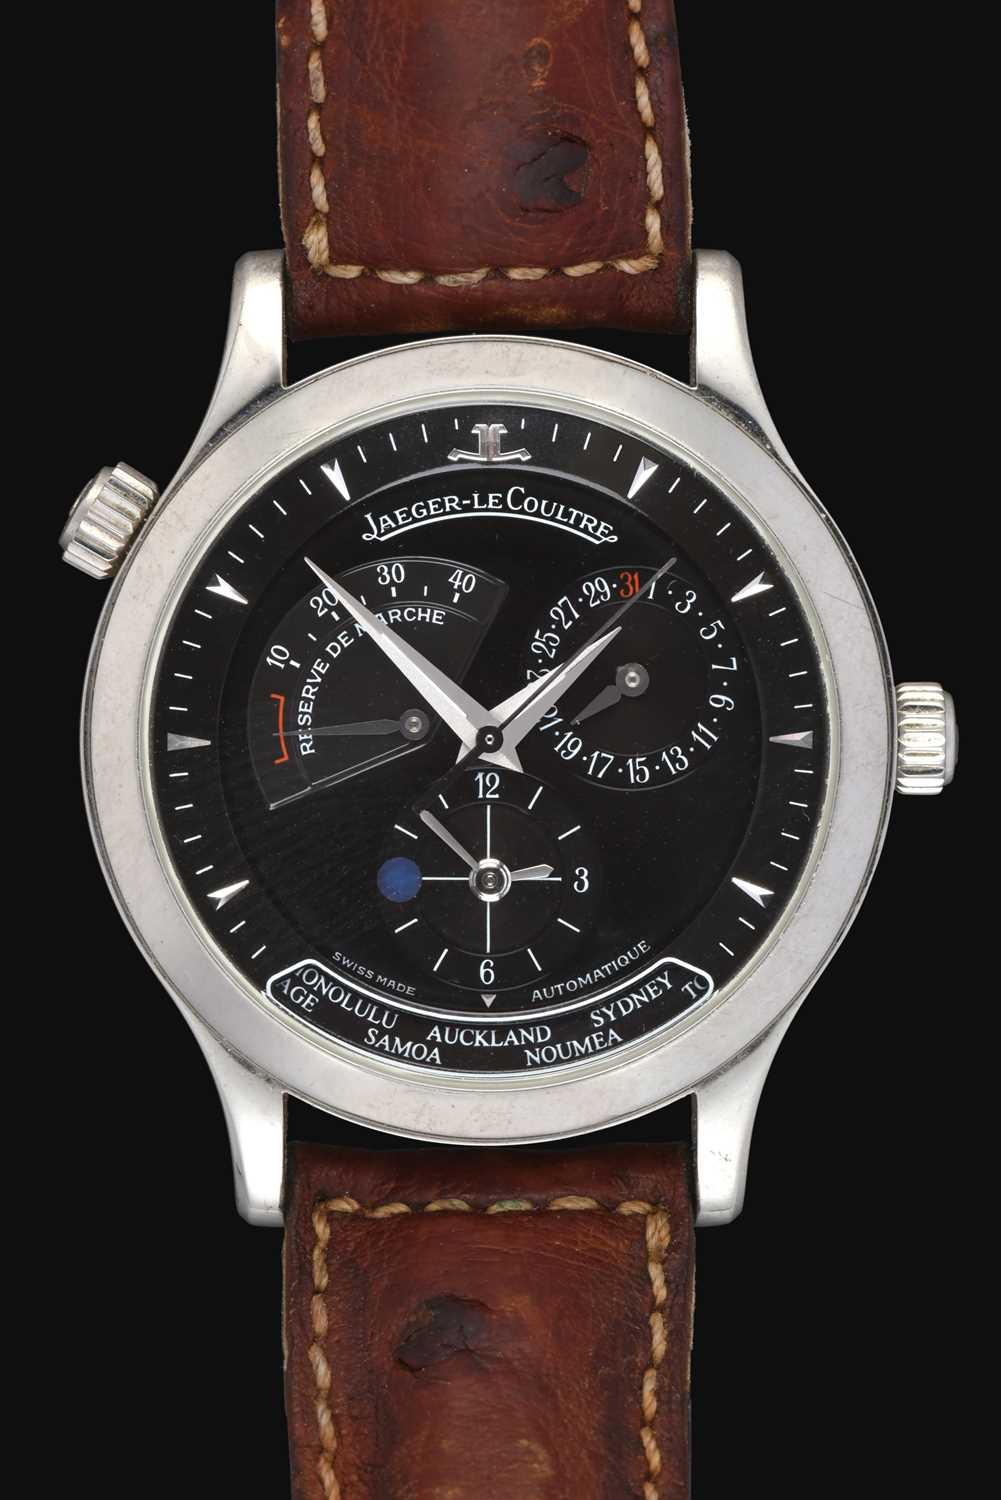 Jaeger LeCoultre: A World Dual Time Zone Automatic Power Reserve Day and Night Indication Wristwatch - Image 2 of 6